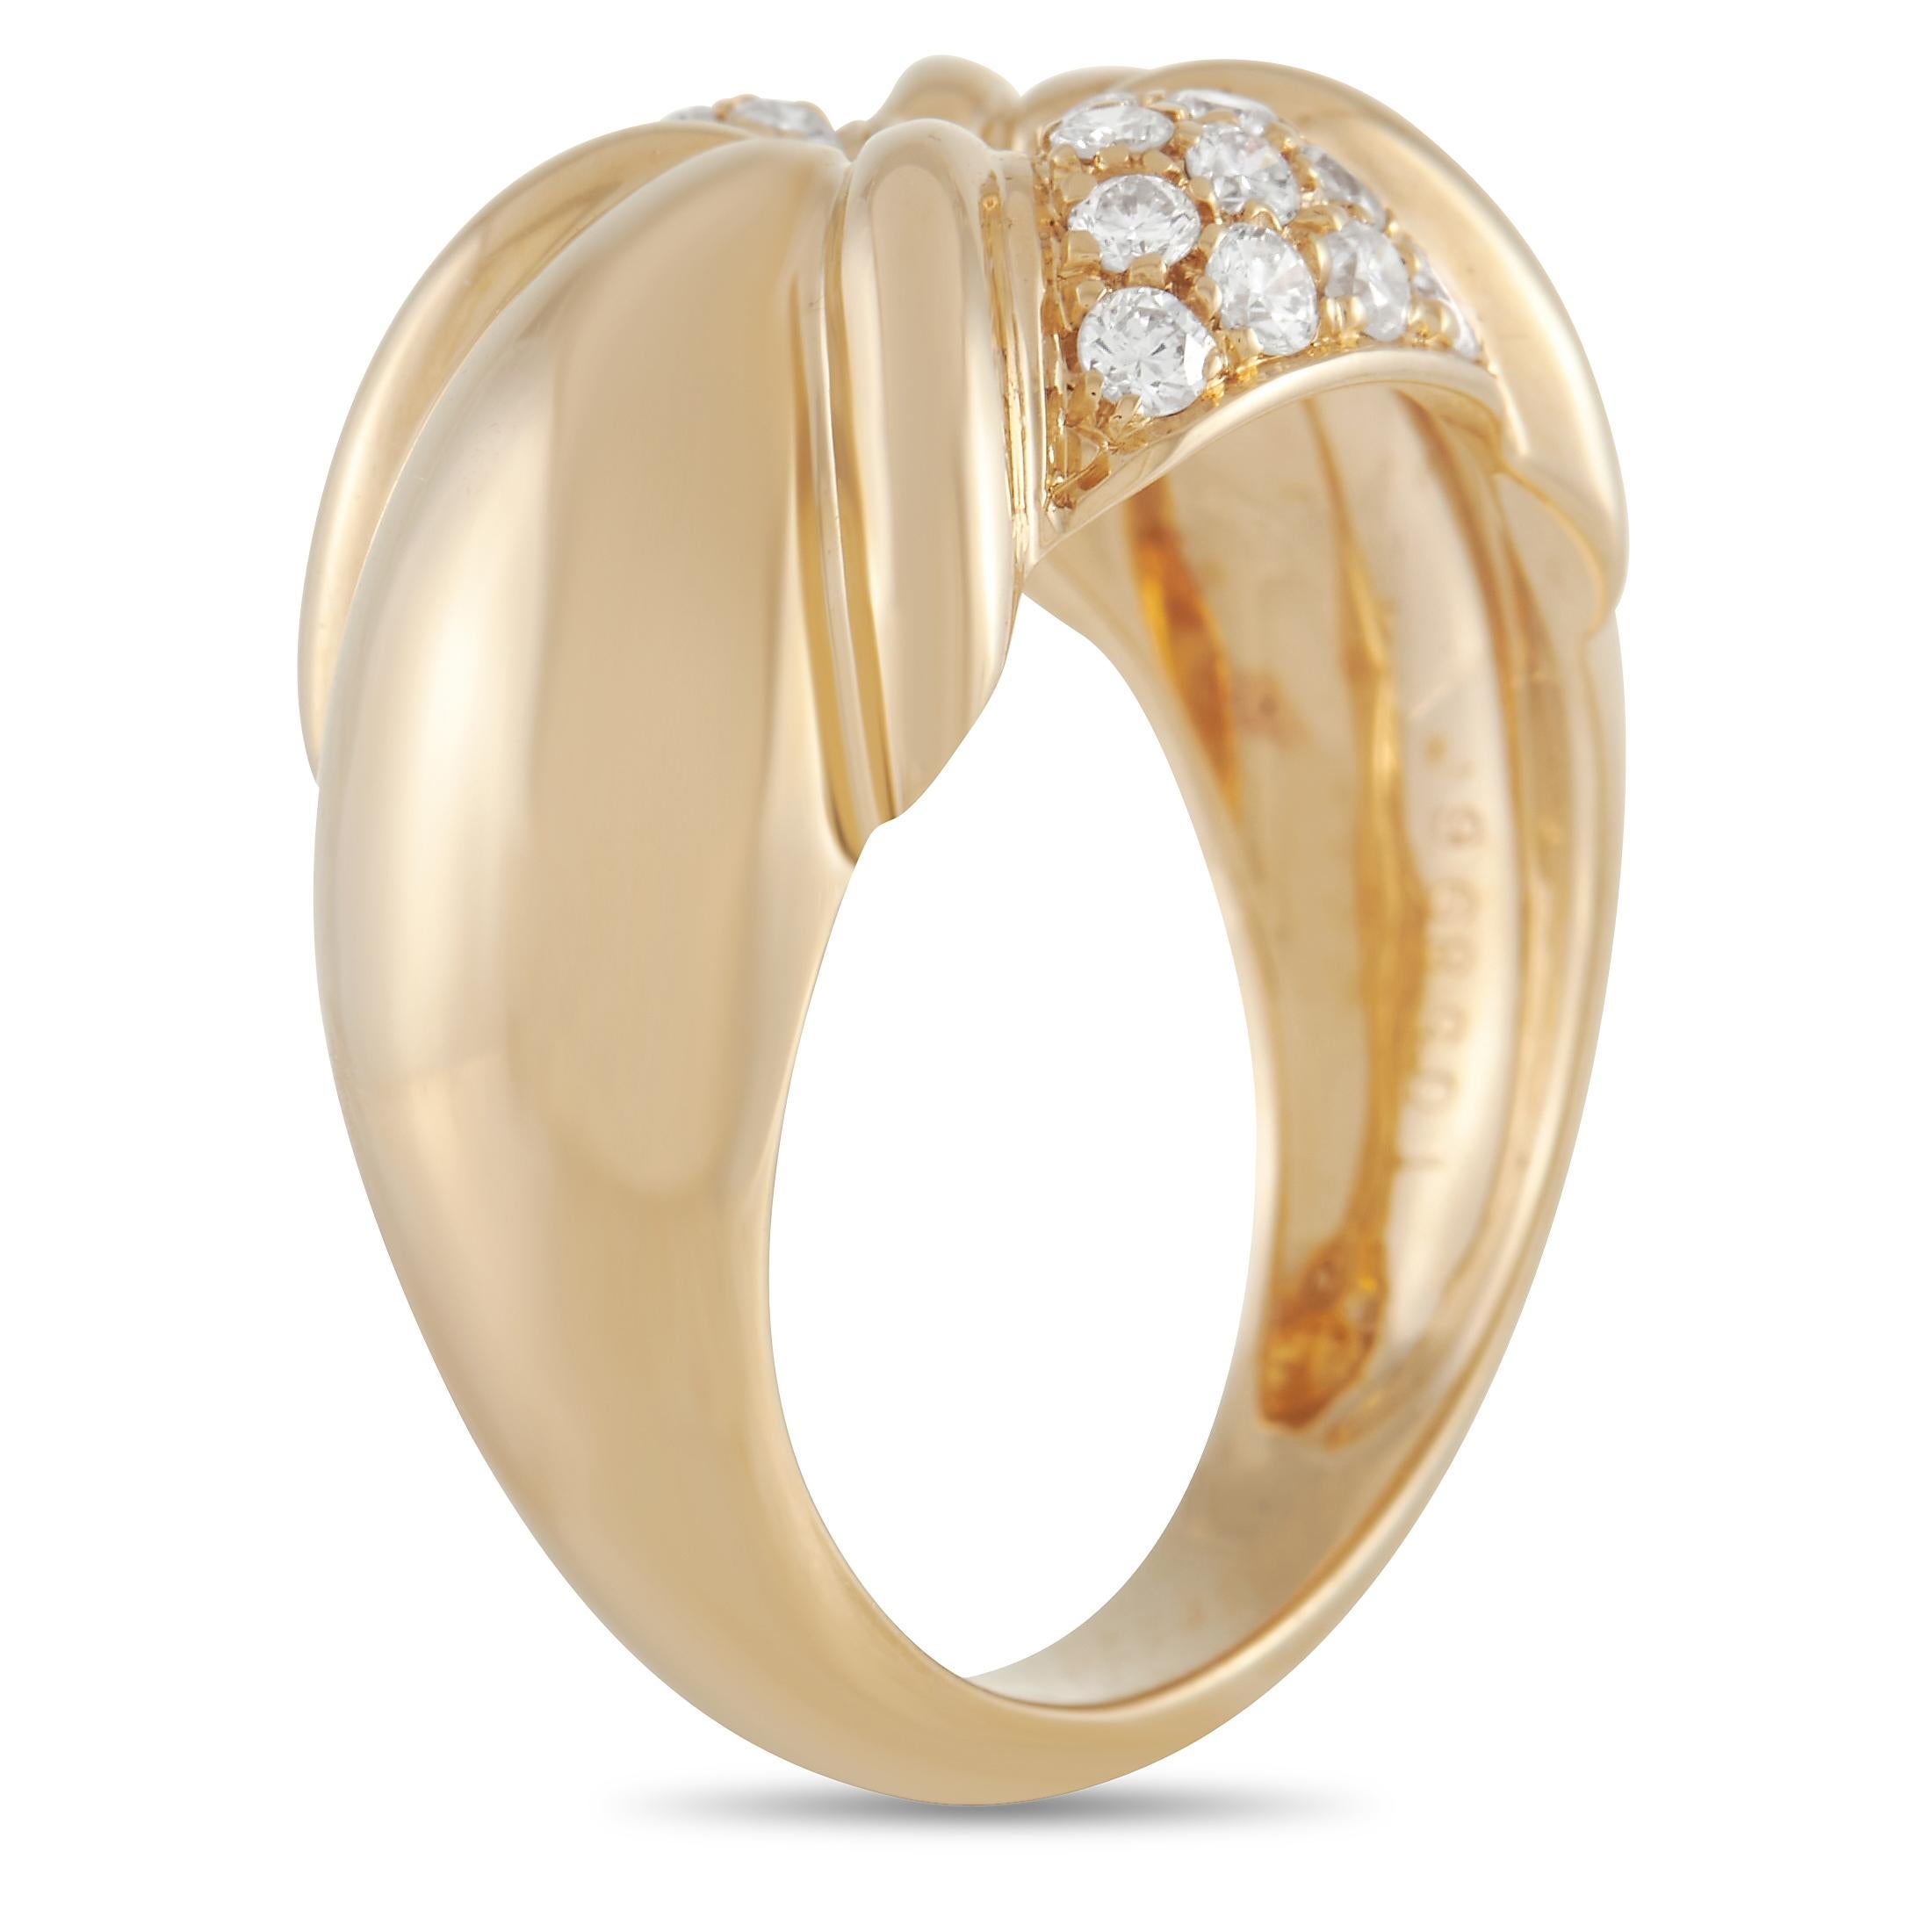 Take your jewelry collection to a surprising new level with the help of this exquisite 18K Yellow Gold ring from Chaumet. Gentle ridges and negative space at the center of this design make it undeniably stunning. With both a band width and top